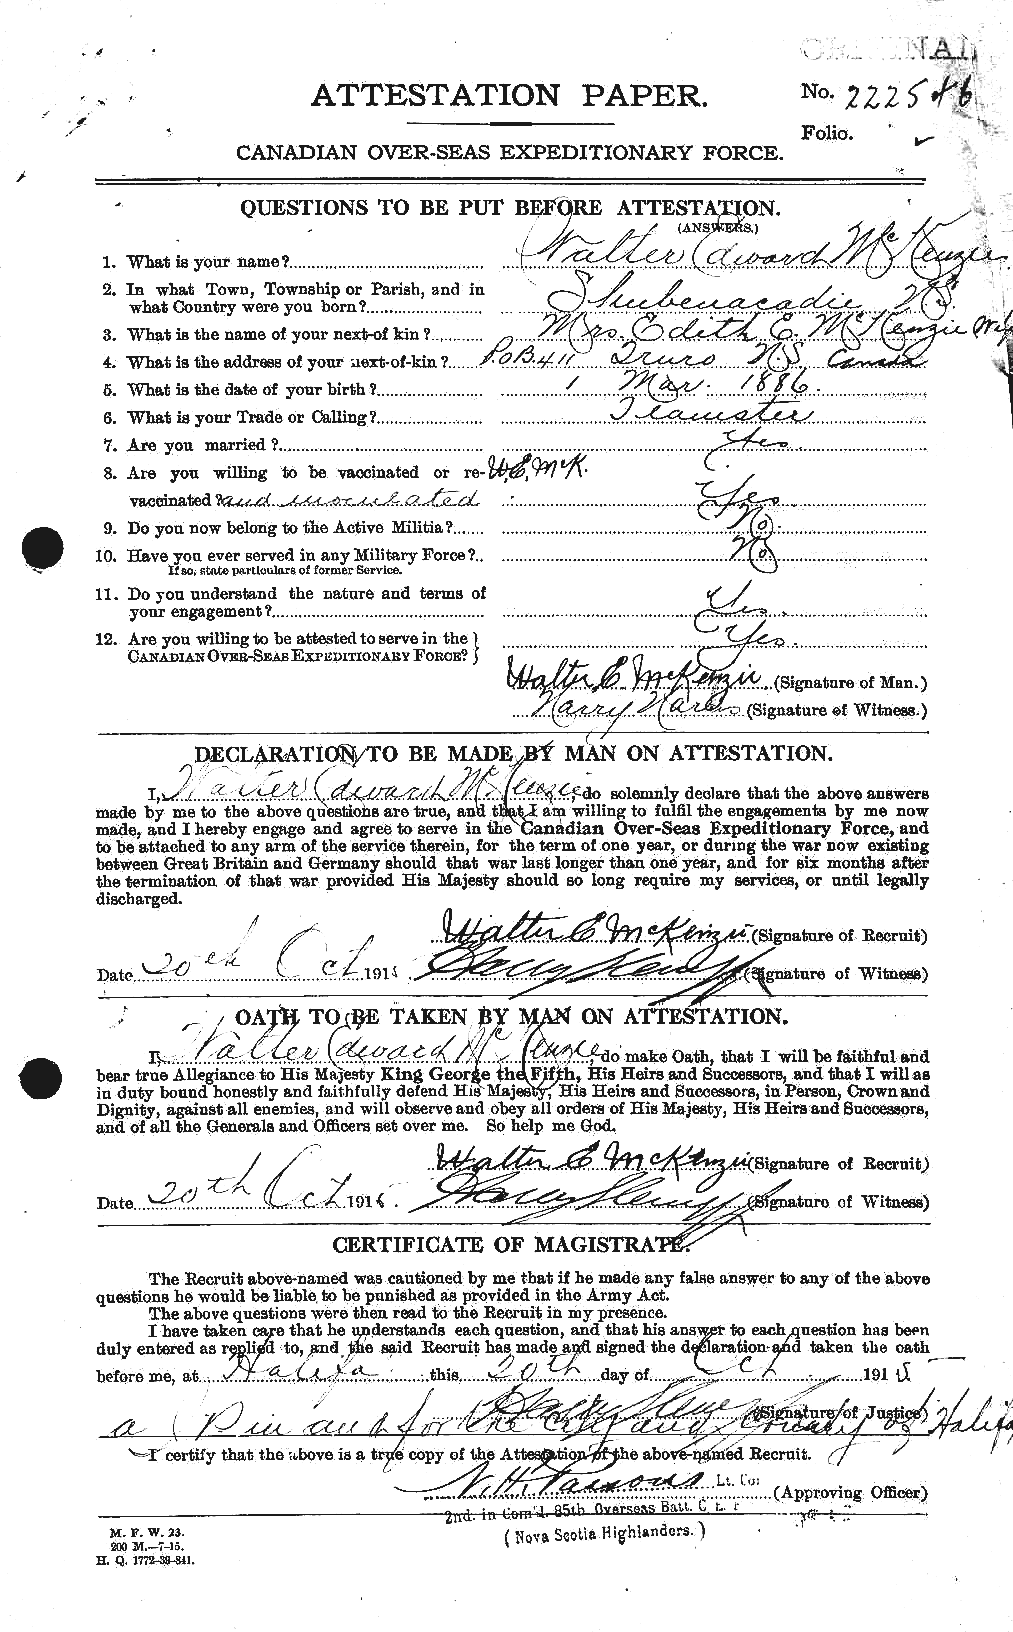 Personnel Records of the First World War - CEF 530048a